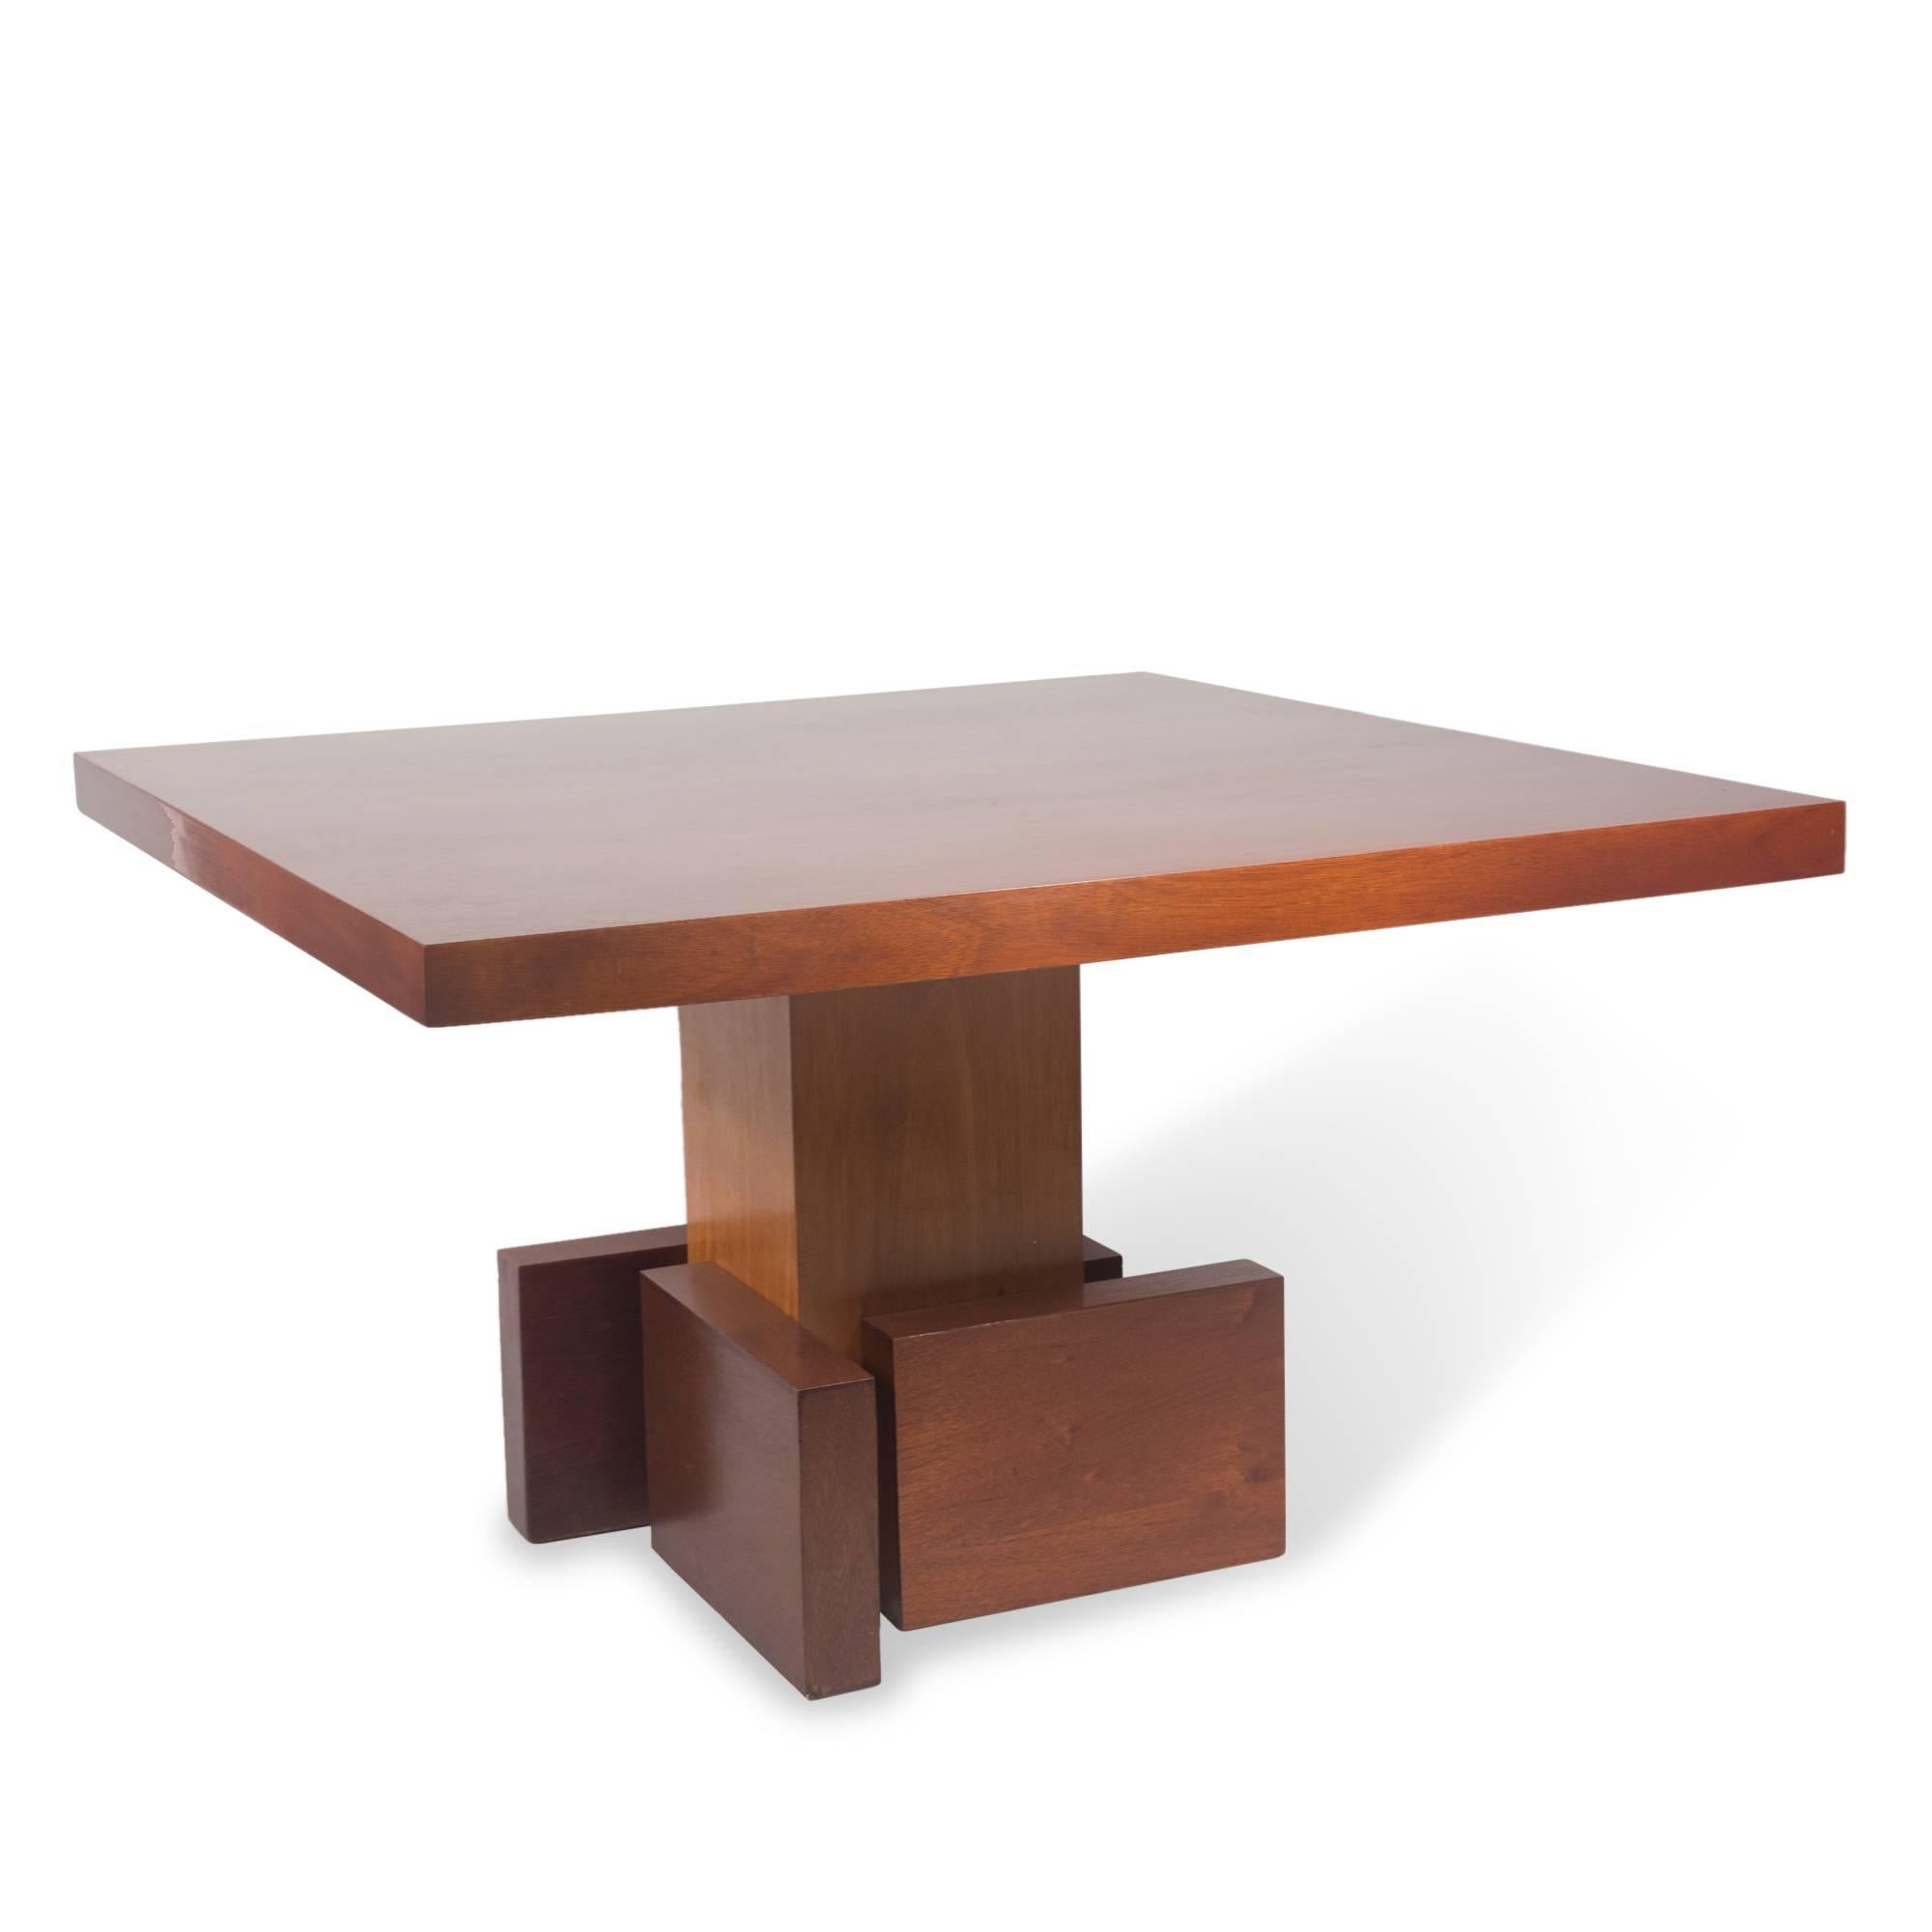 Mid-20th Century Cubist Pedestal Base Square Dining Table, French, 1930s For Sale